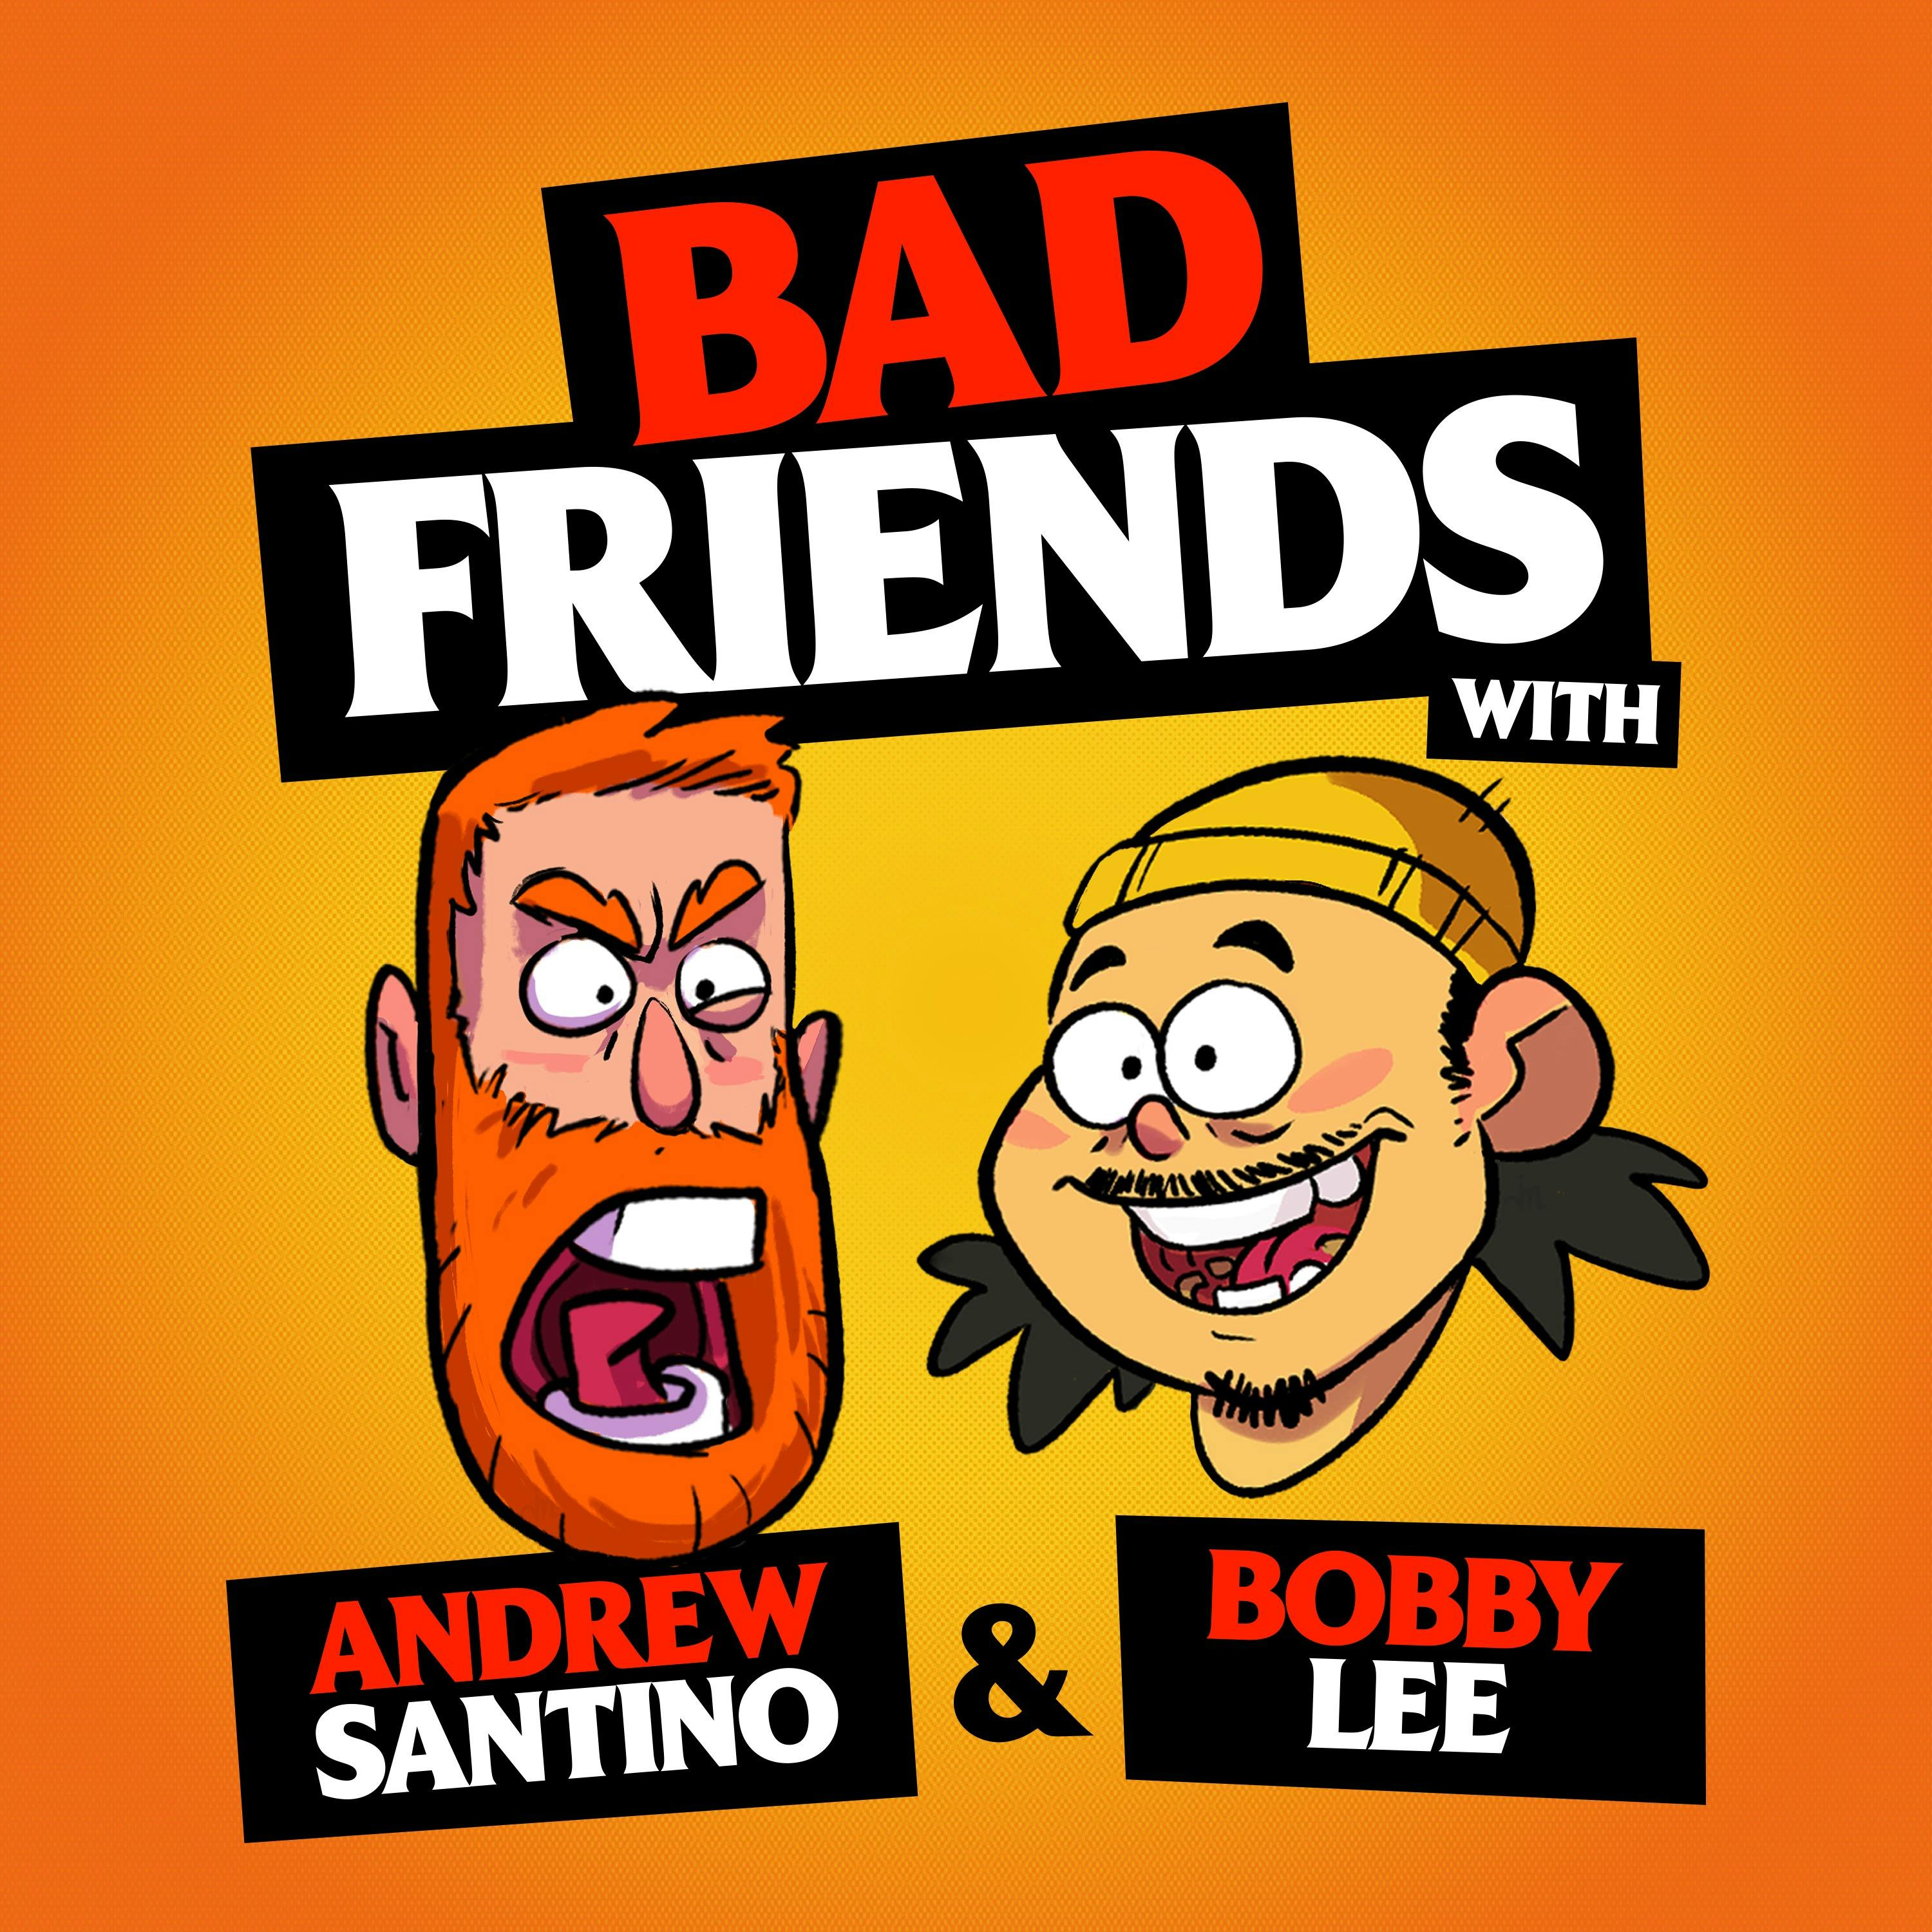 Shoot The TV by Andrew Santino and Bobby Lee